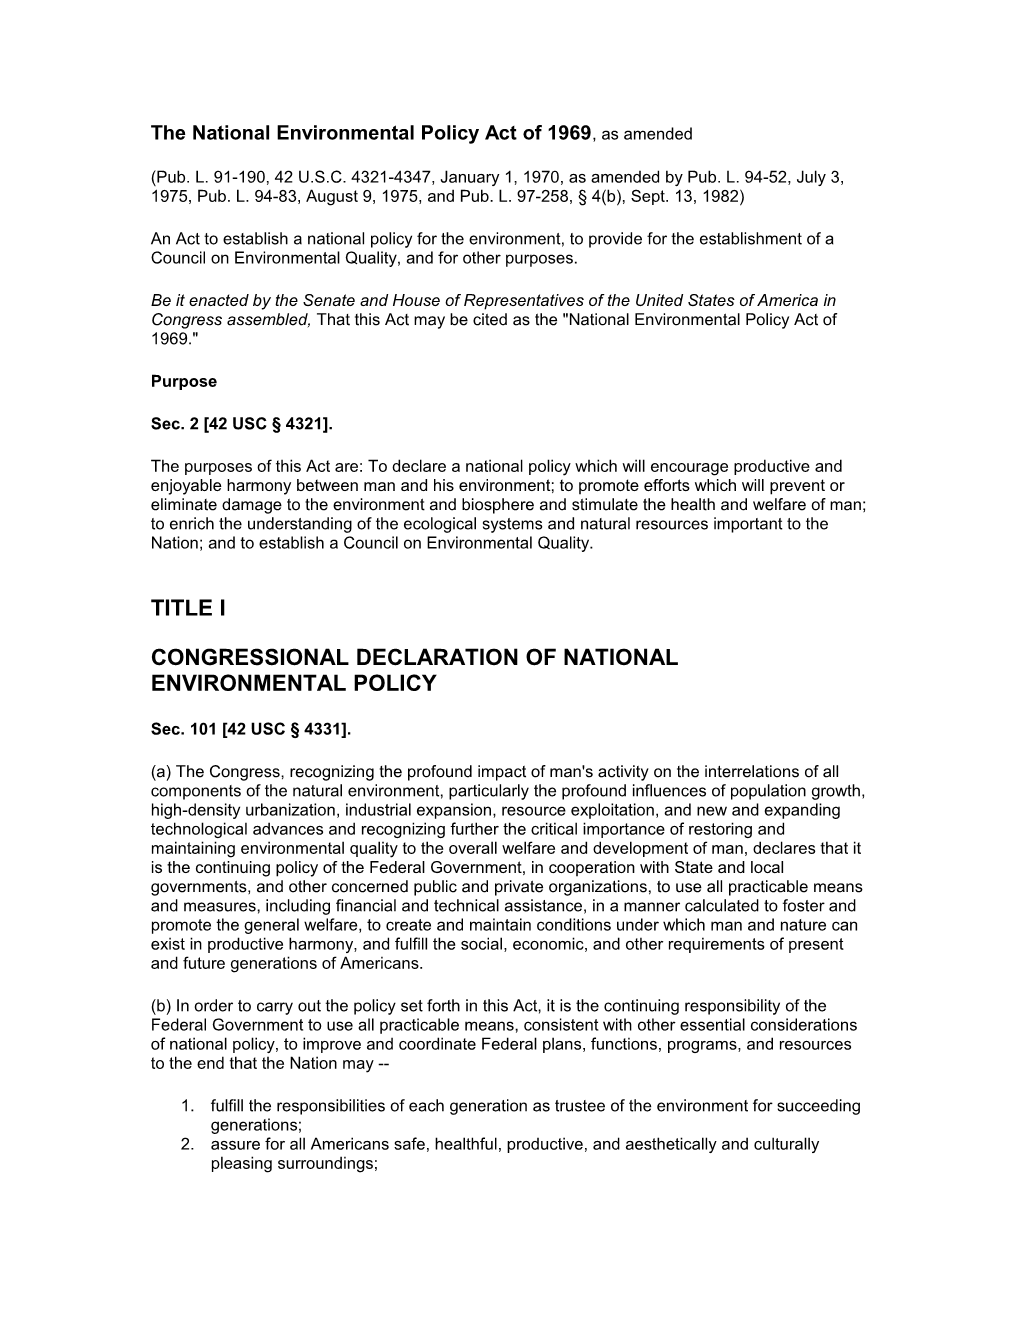 The National Environmental Policy Act of 1969, As Amended